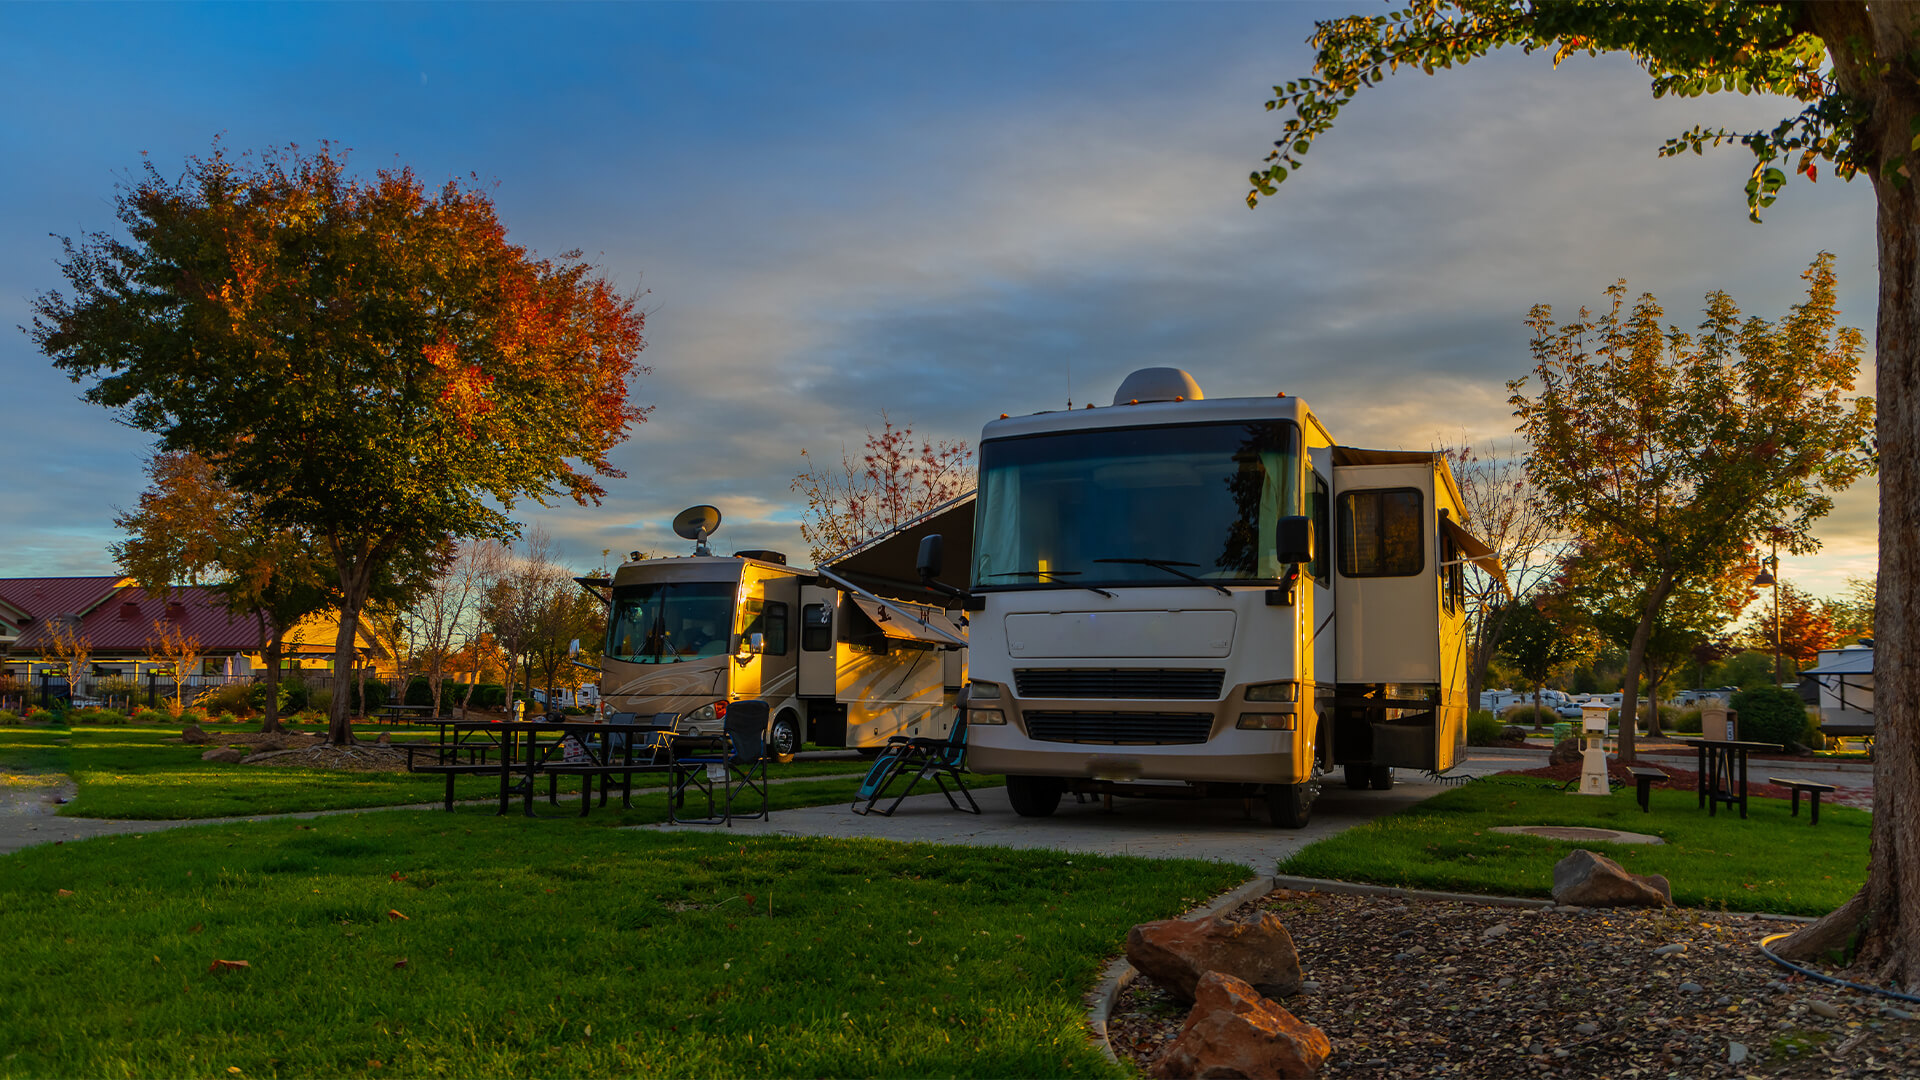 Beautiful sunset in autumn at the Rv campsite with clouds and blue skies